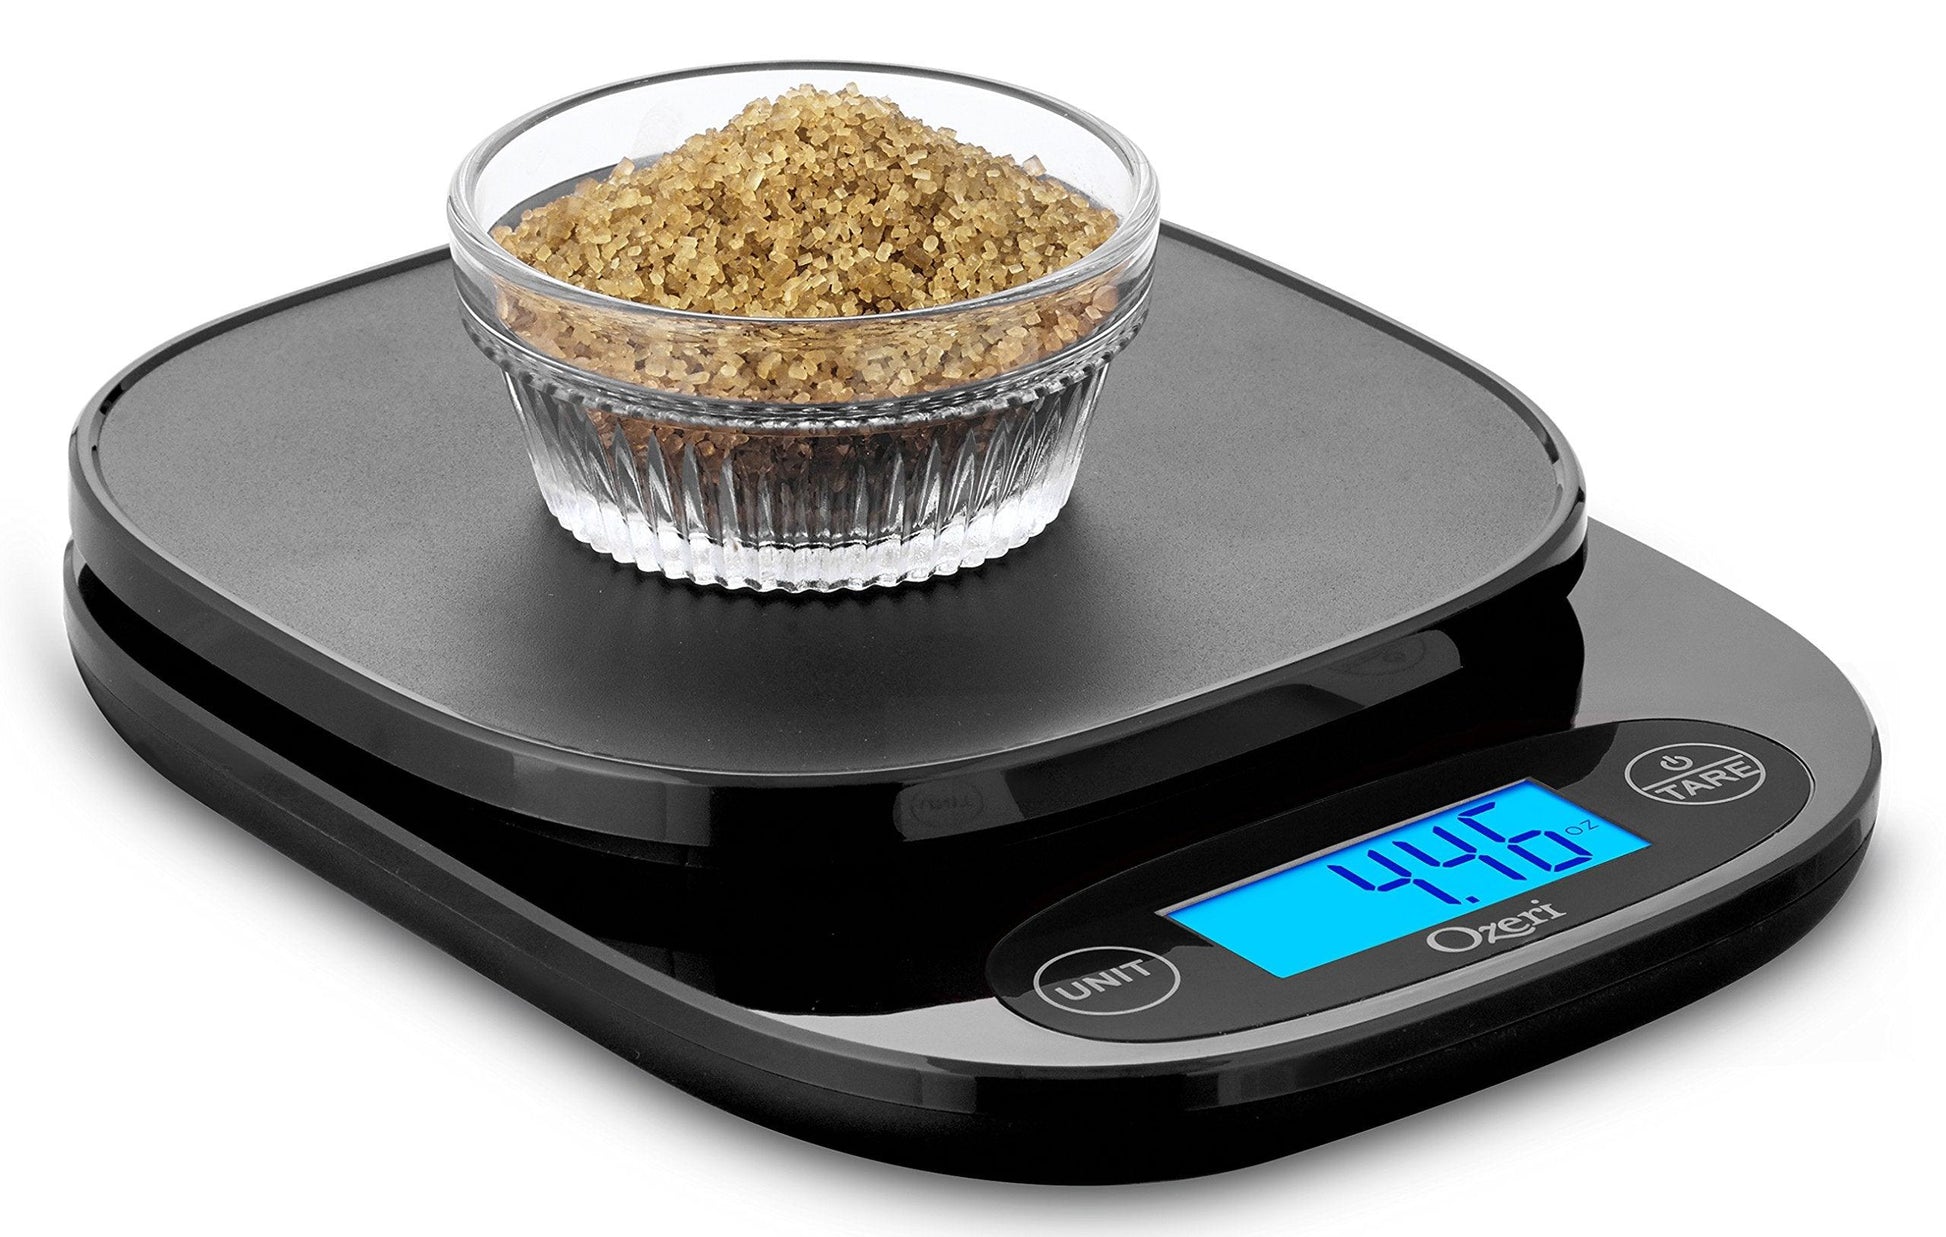 Ozeri ZK24 Garden and Kitchen Scale, with 0.5 g (0.01 oz) Precision Weighing Technology - CookCave